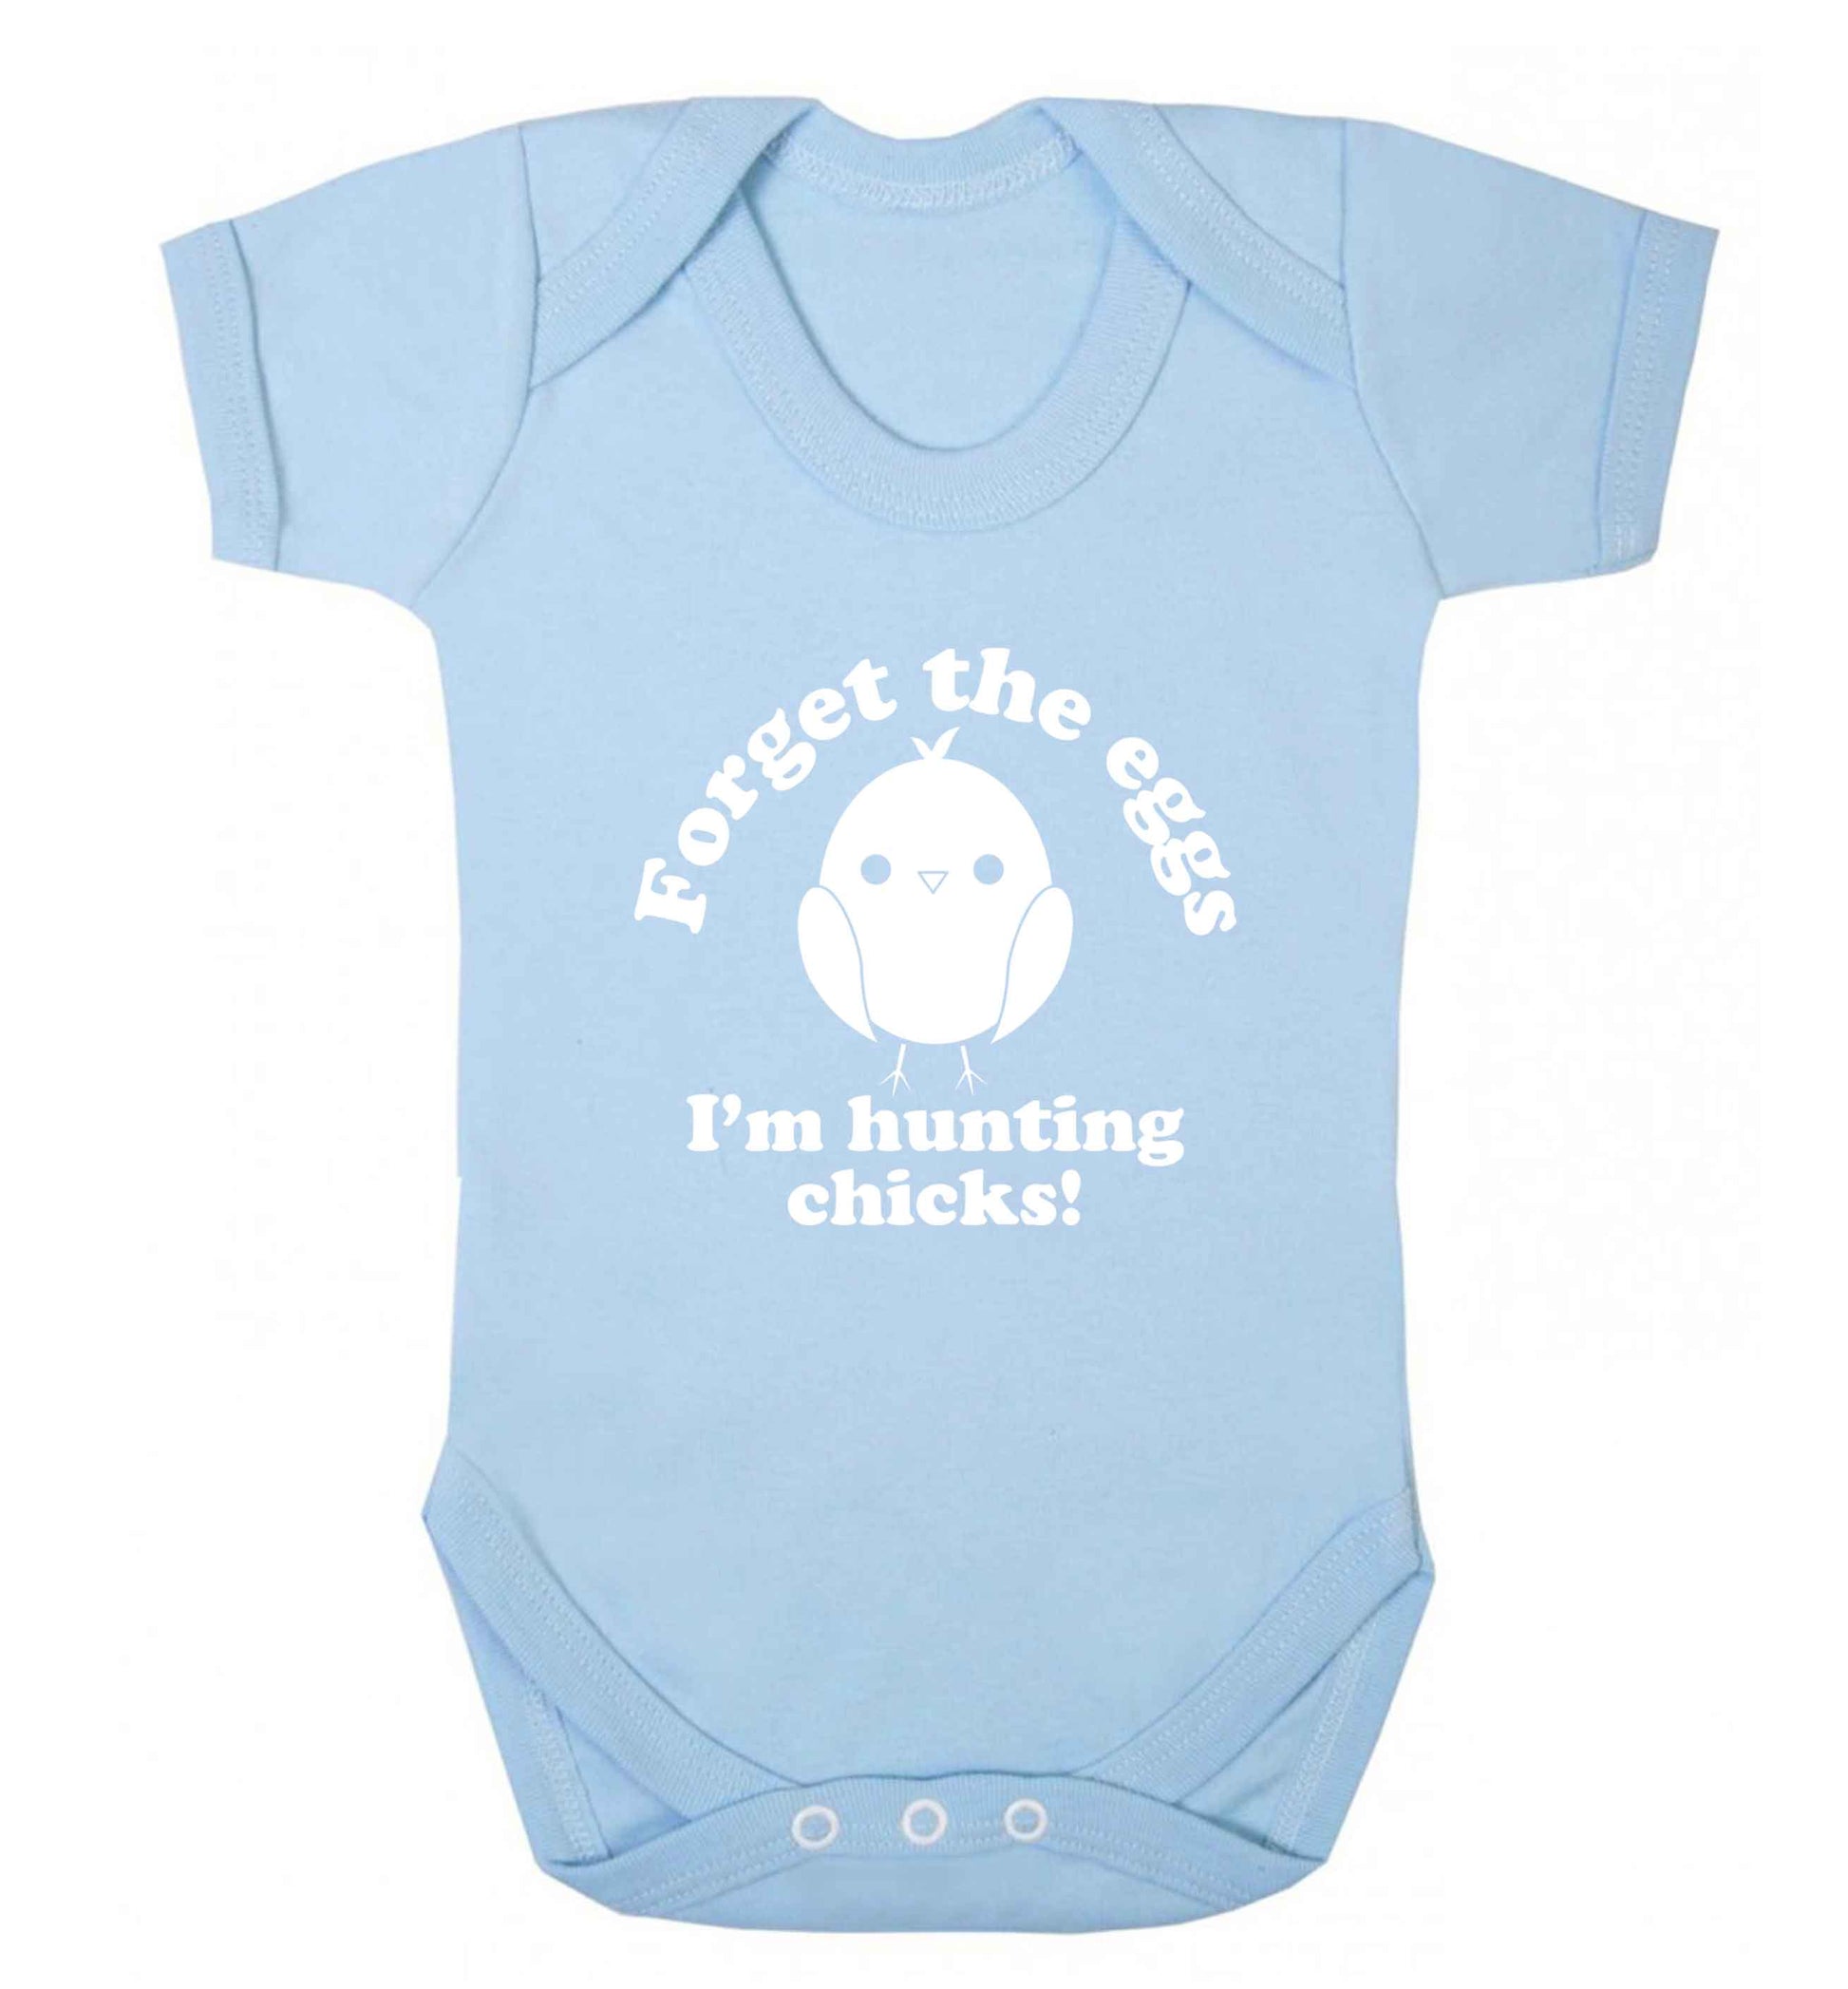 Forget the eggs I'm hunting chicks! baby vest pale blue 18-24 months